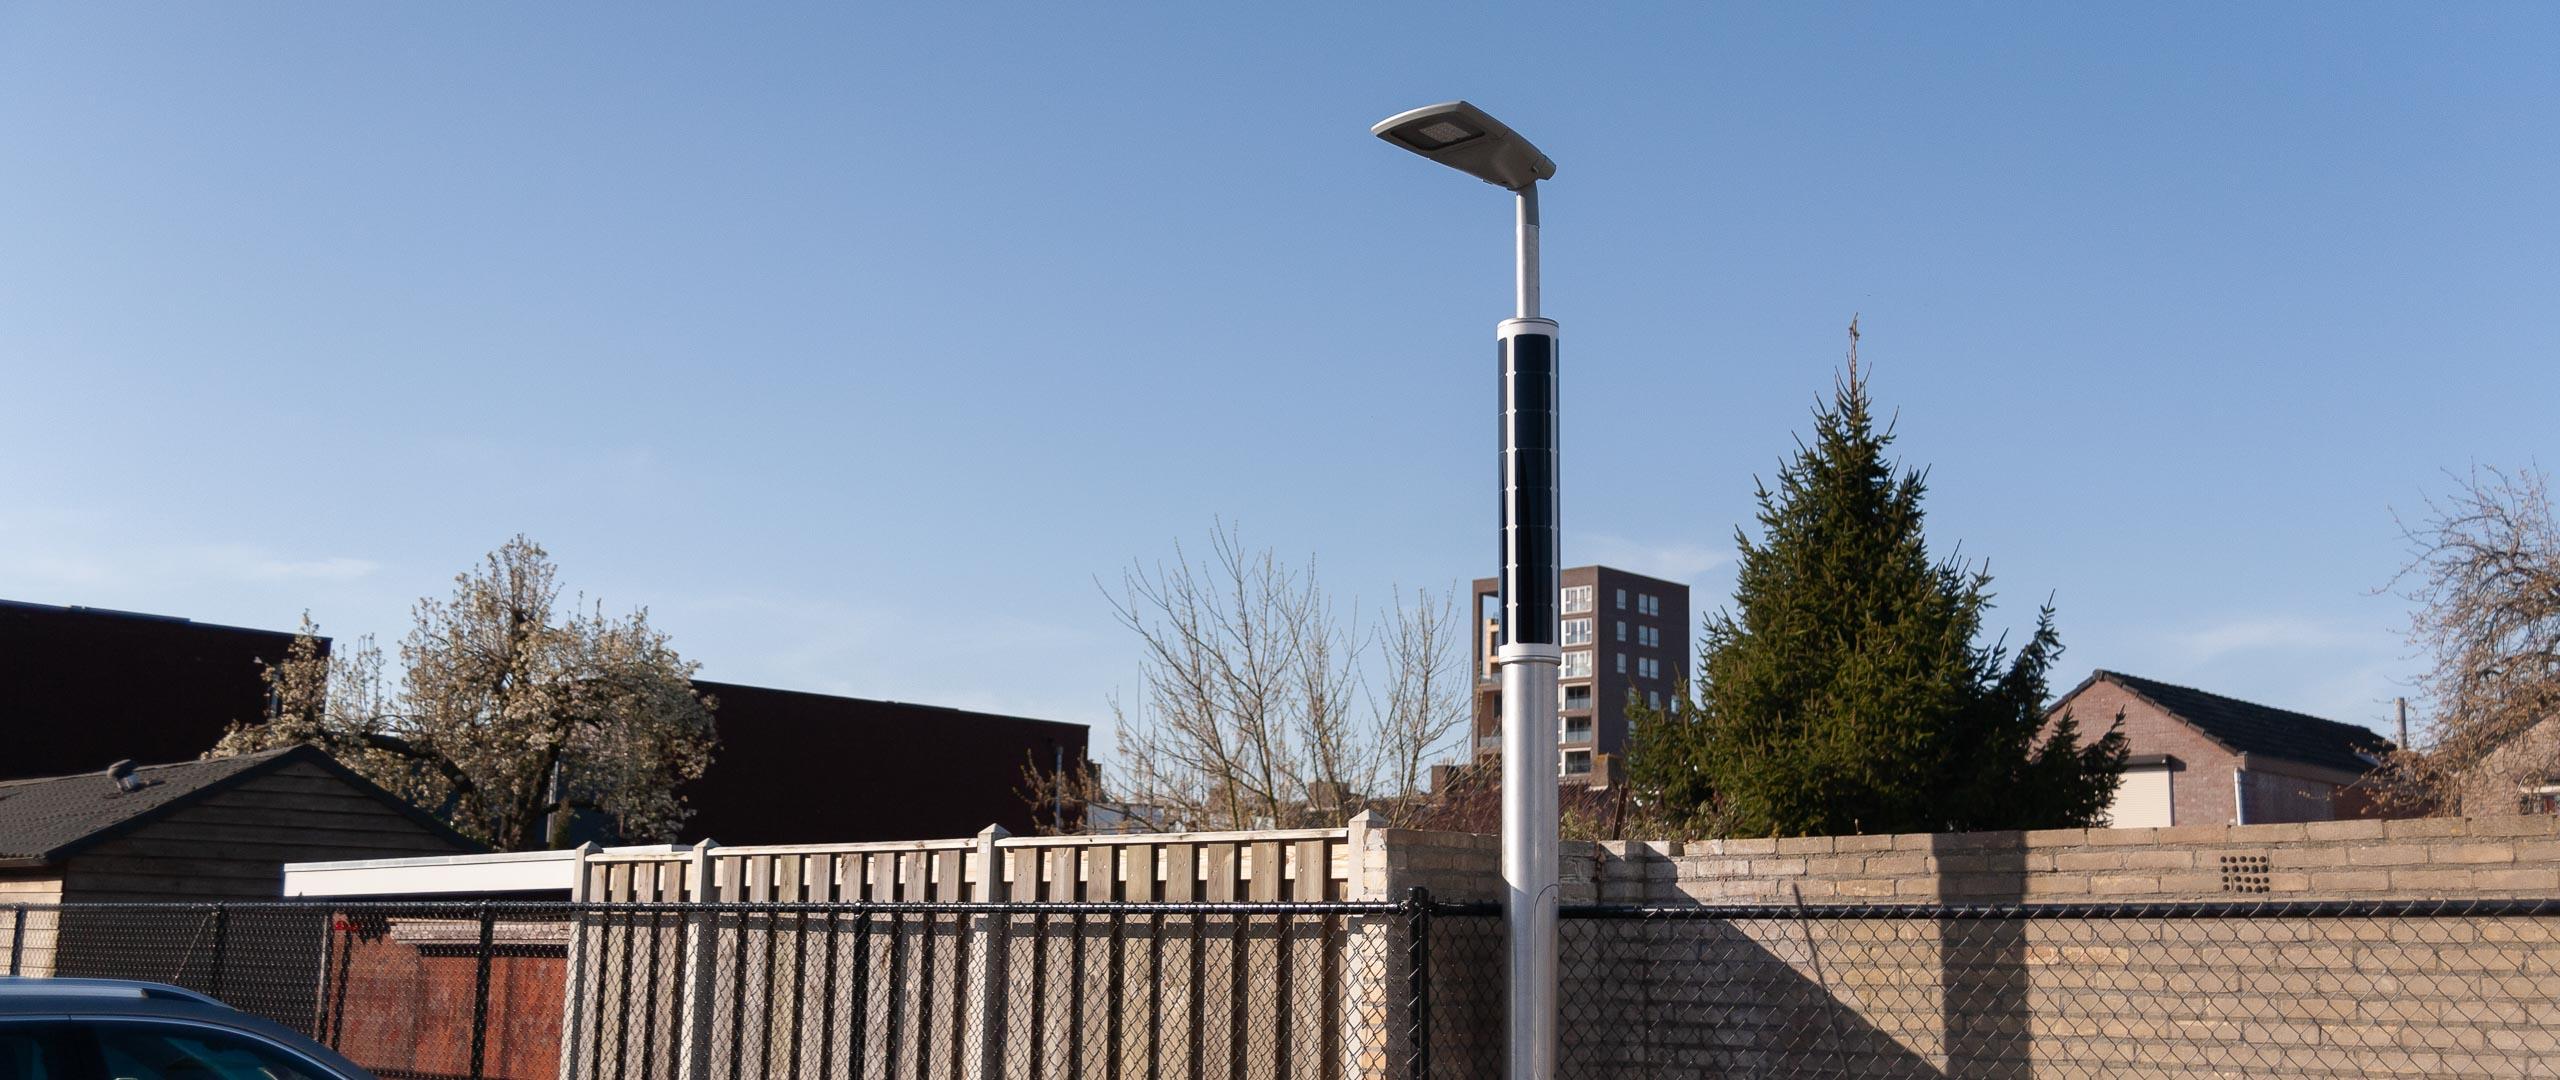 Soluxio solar-powered parking lot lights at residential area in the Netherlands